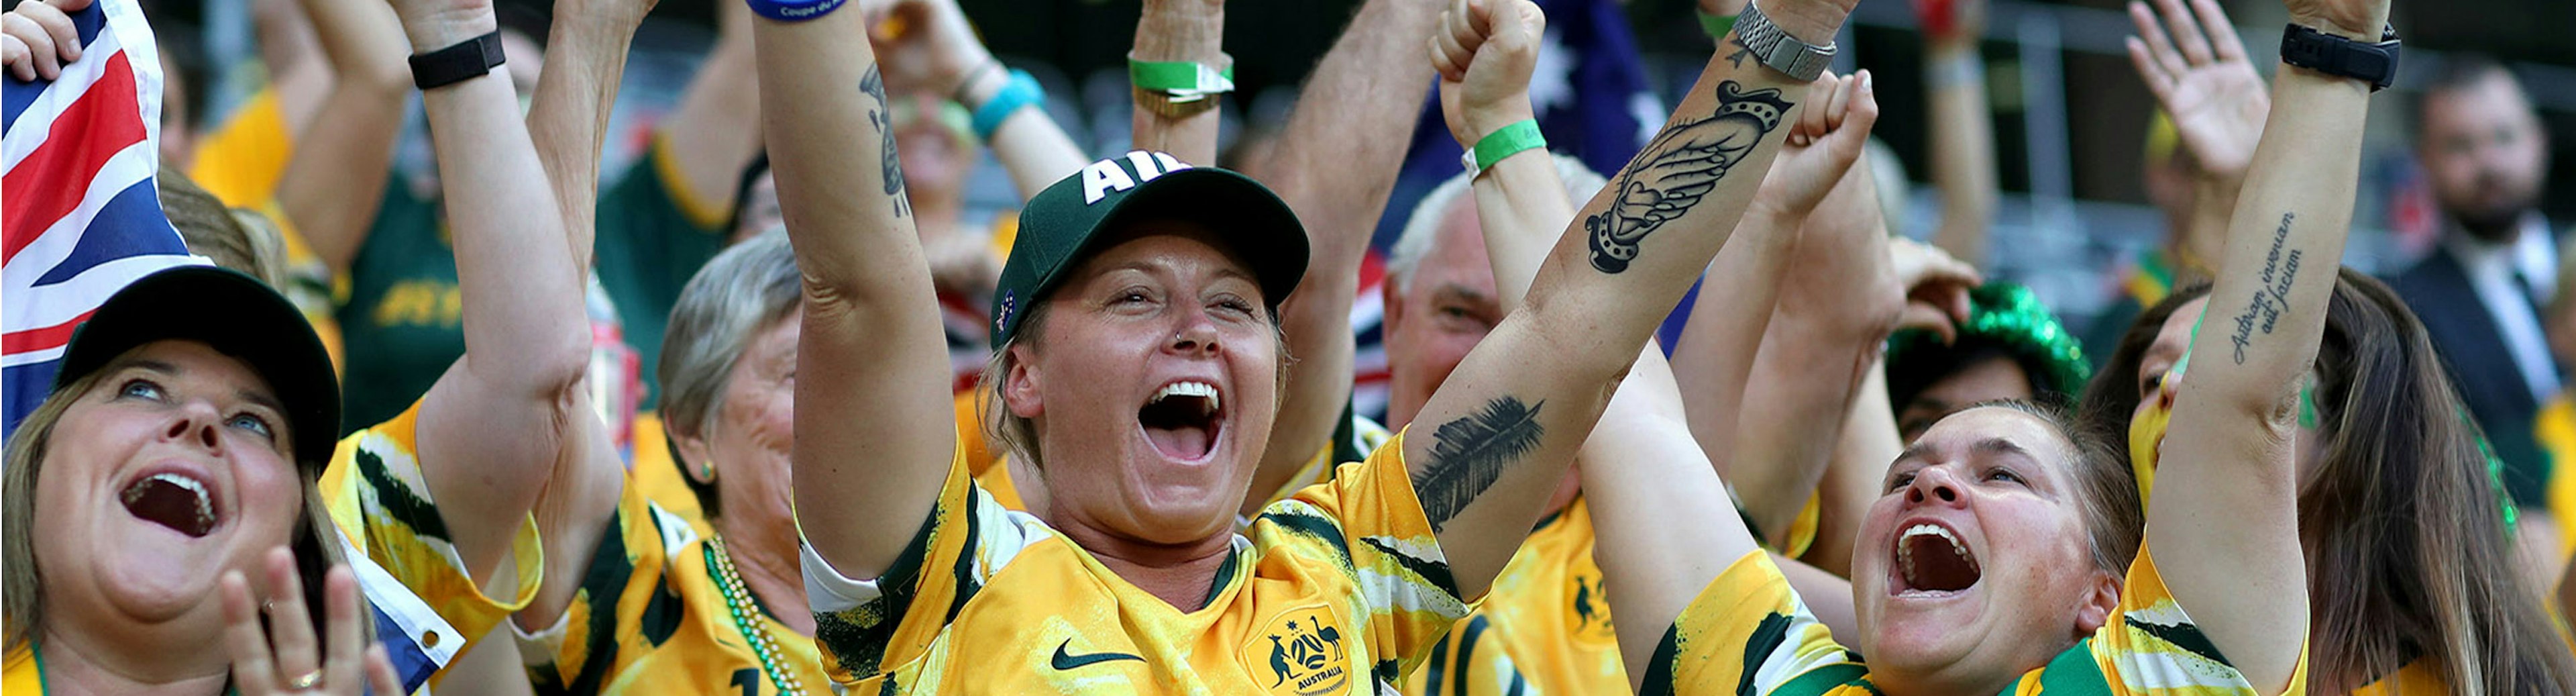 An Australian soccer fanning wearing the green and gold jersey smiling with their arms up in the air in celebration